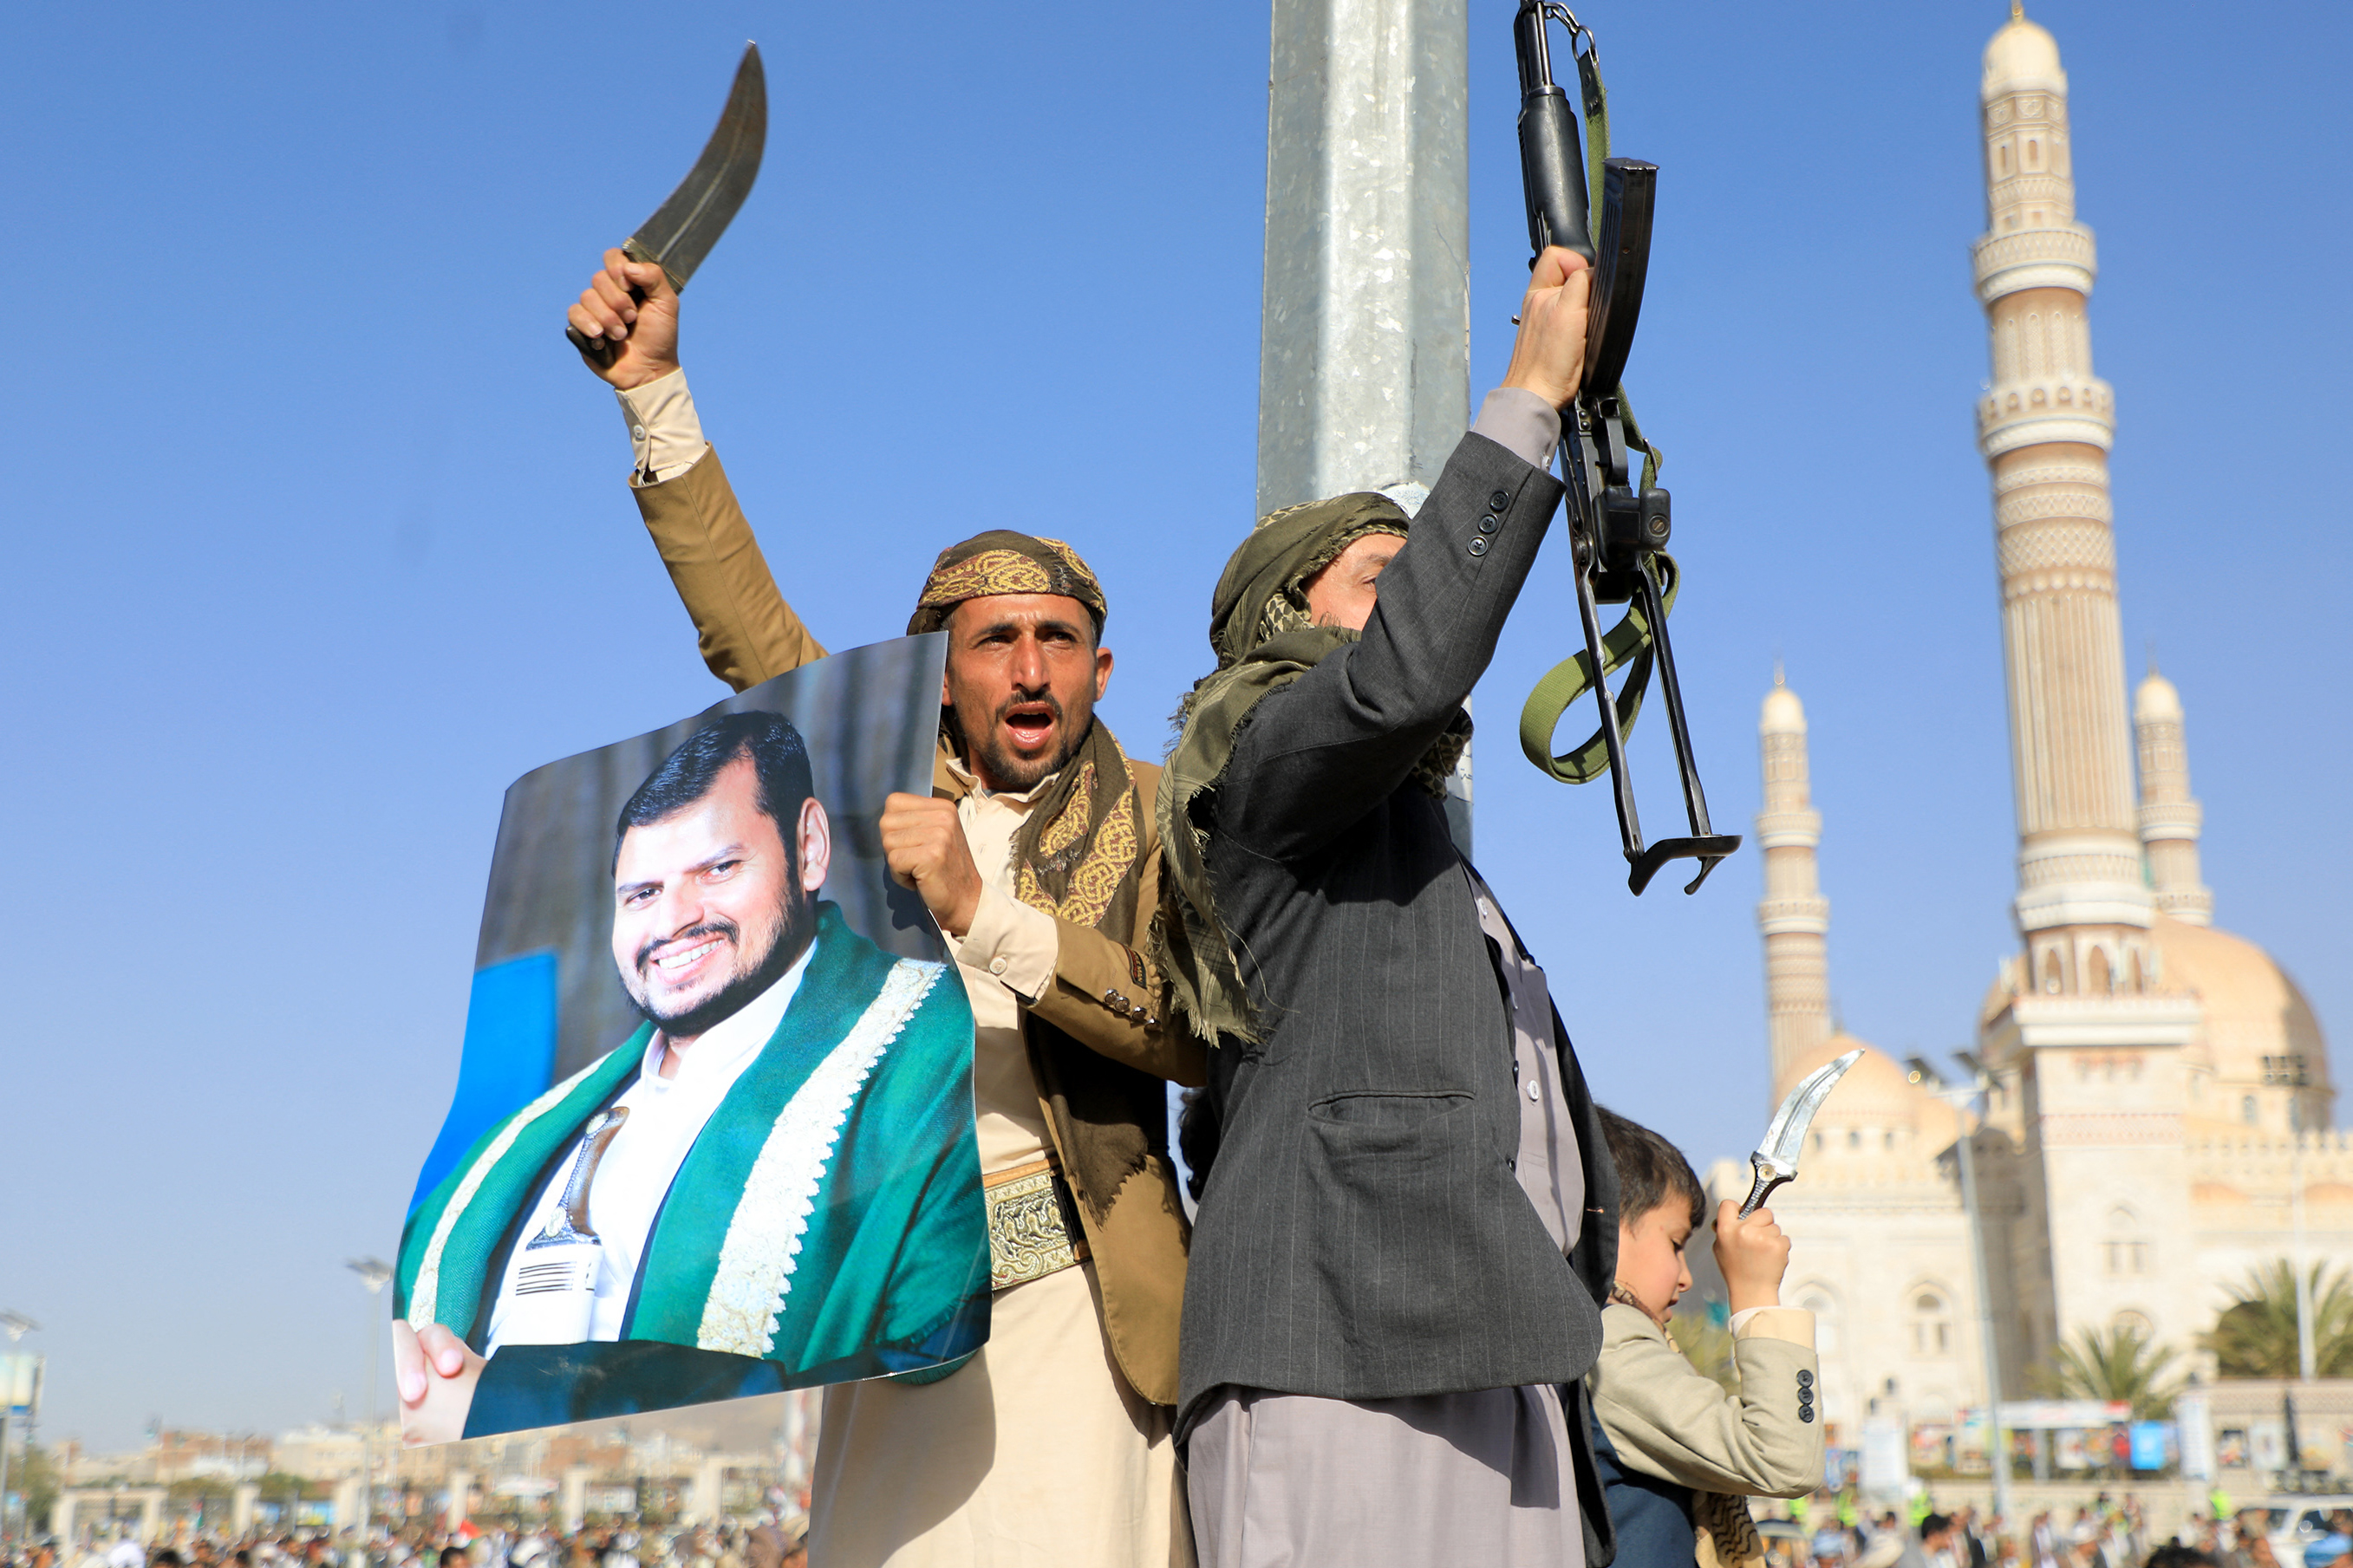 Two men raise weapons against a blue sky: on the left, a man in a tan suit jacket holds a photo of Houthi leader Abdul Malik al-Houthi in one hand and brandishes a curved knife in the other; on the right, a man in a grey suit jacket raises an automatic rifle.